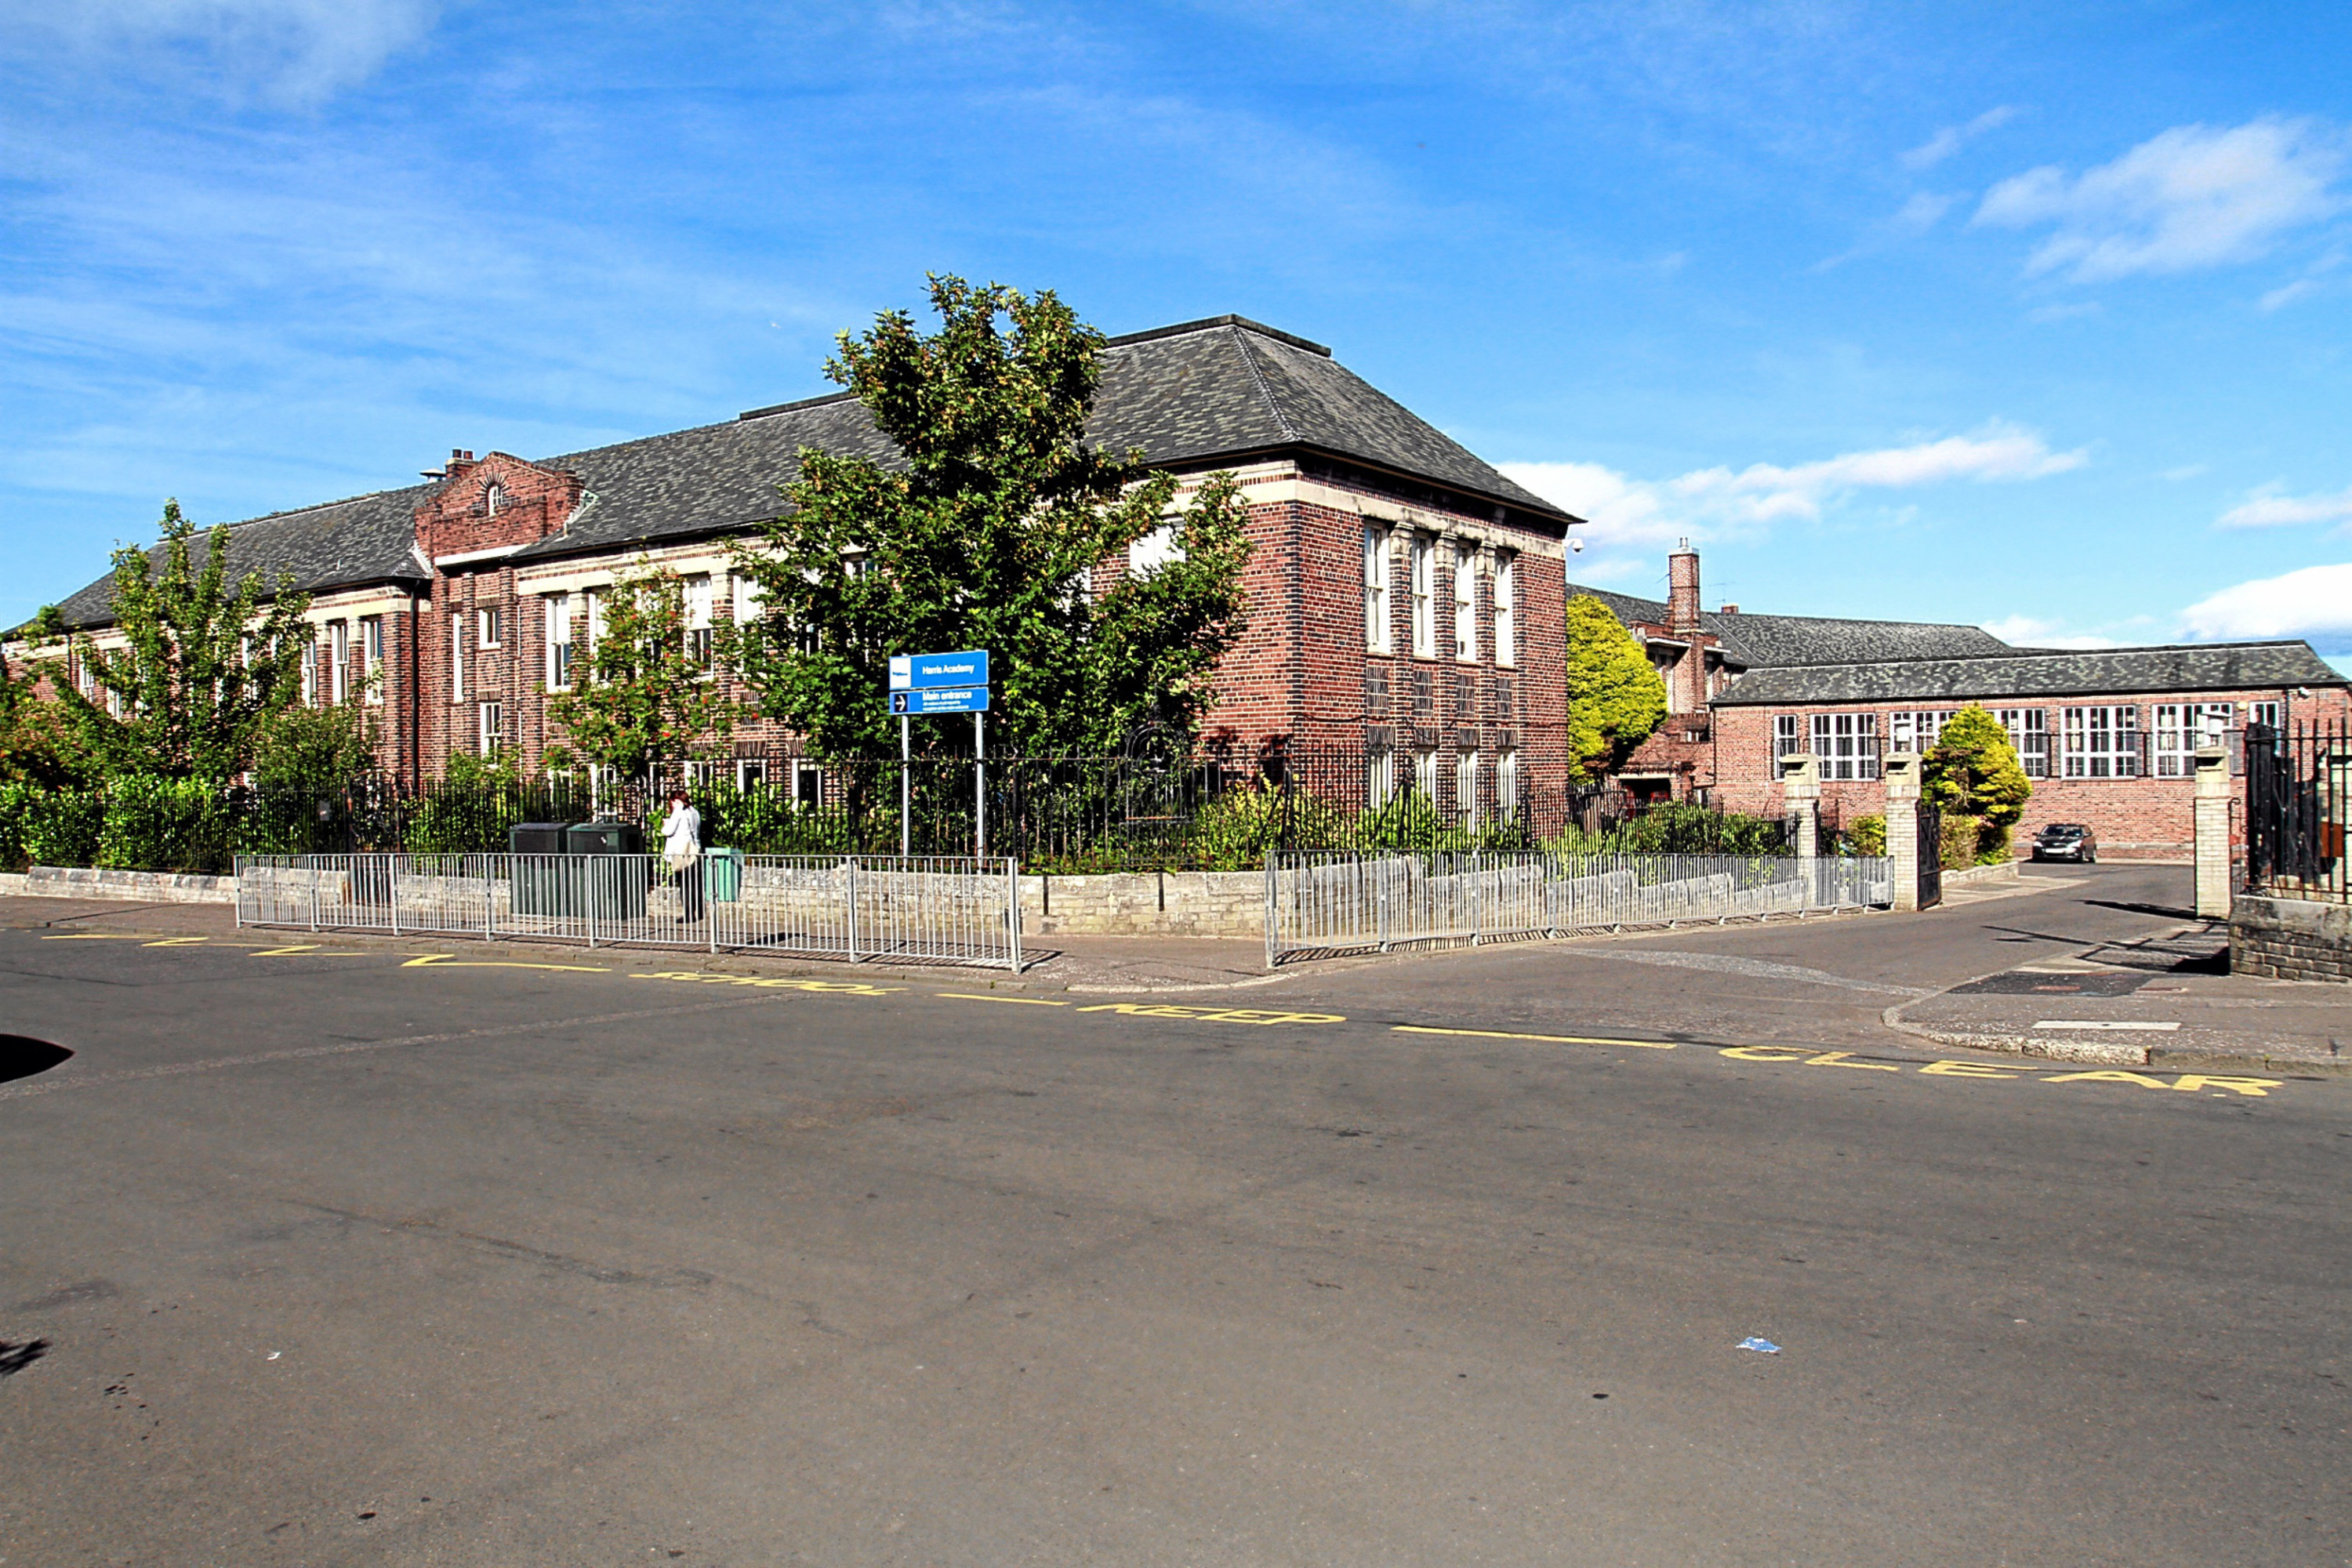 Harris Academy pupils are temporarily being taught at the former Rockwell High School.